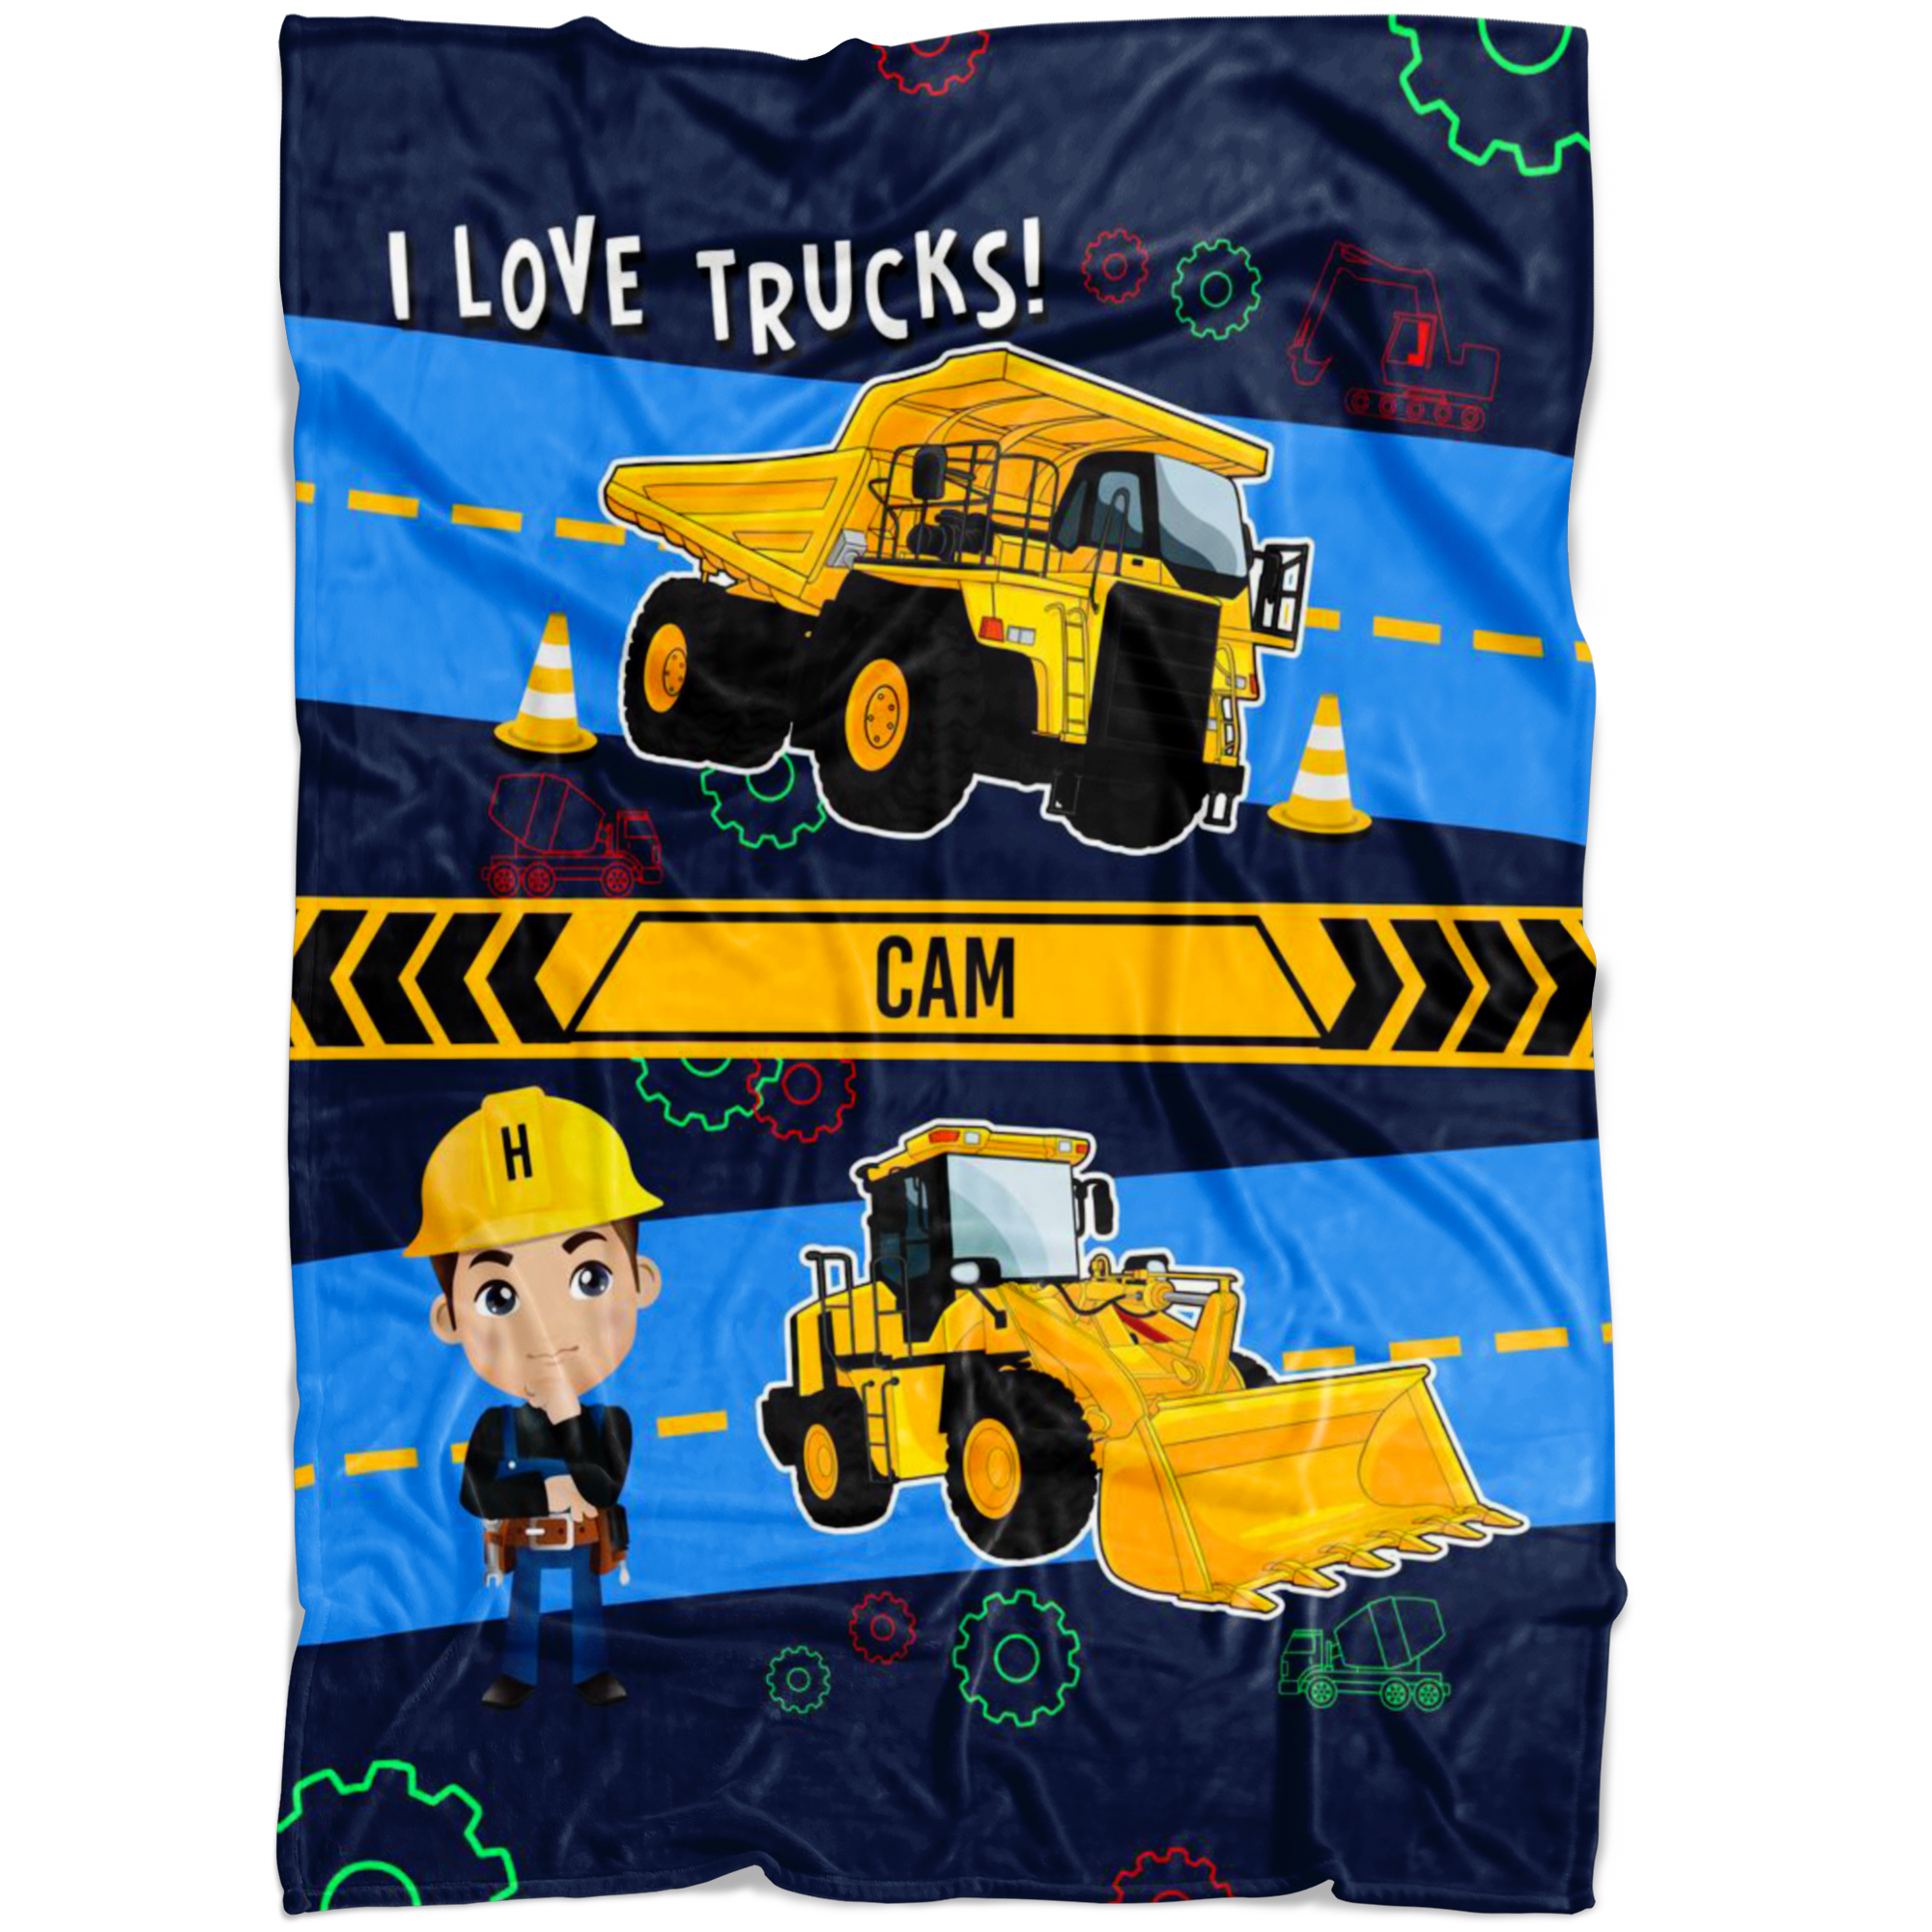 Personalized Name I Love Trucks Blanket for Boys & Girls with Character Personalization - Cam